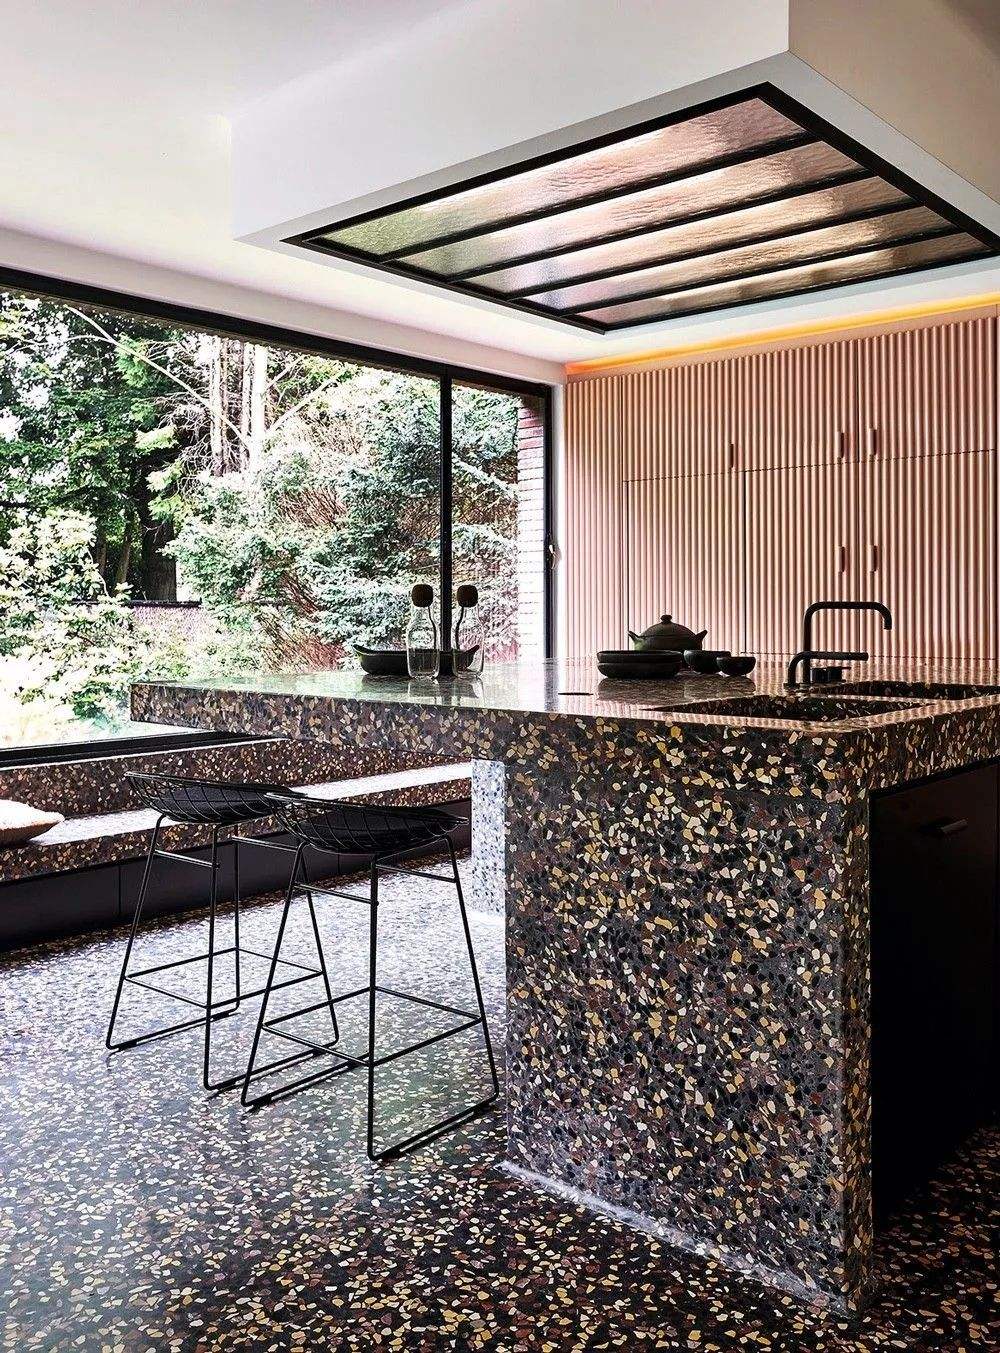 Terrazzo become more and more popular in modern architecture